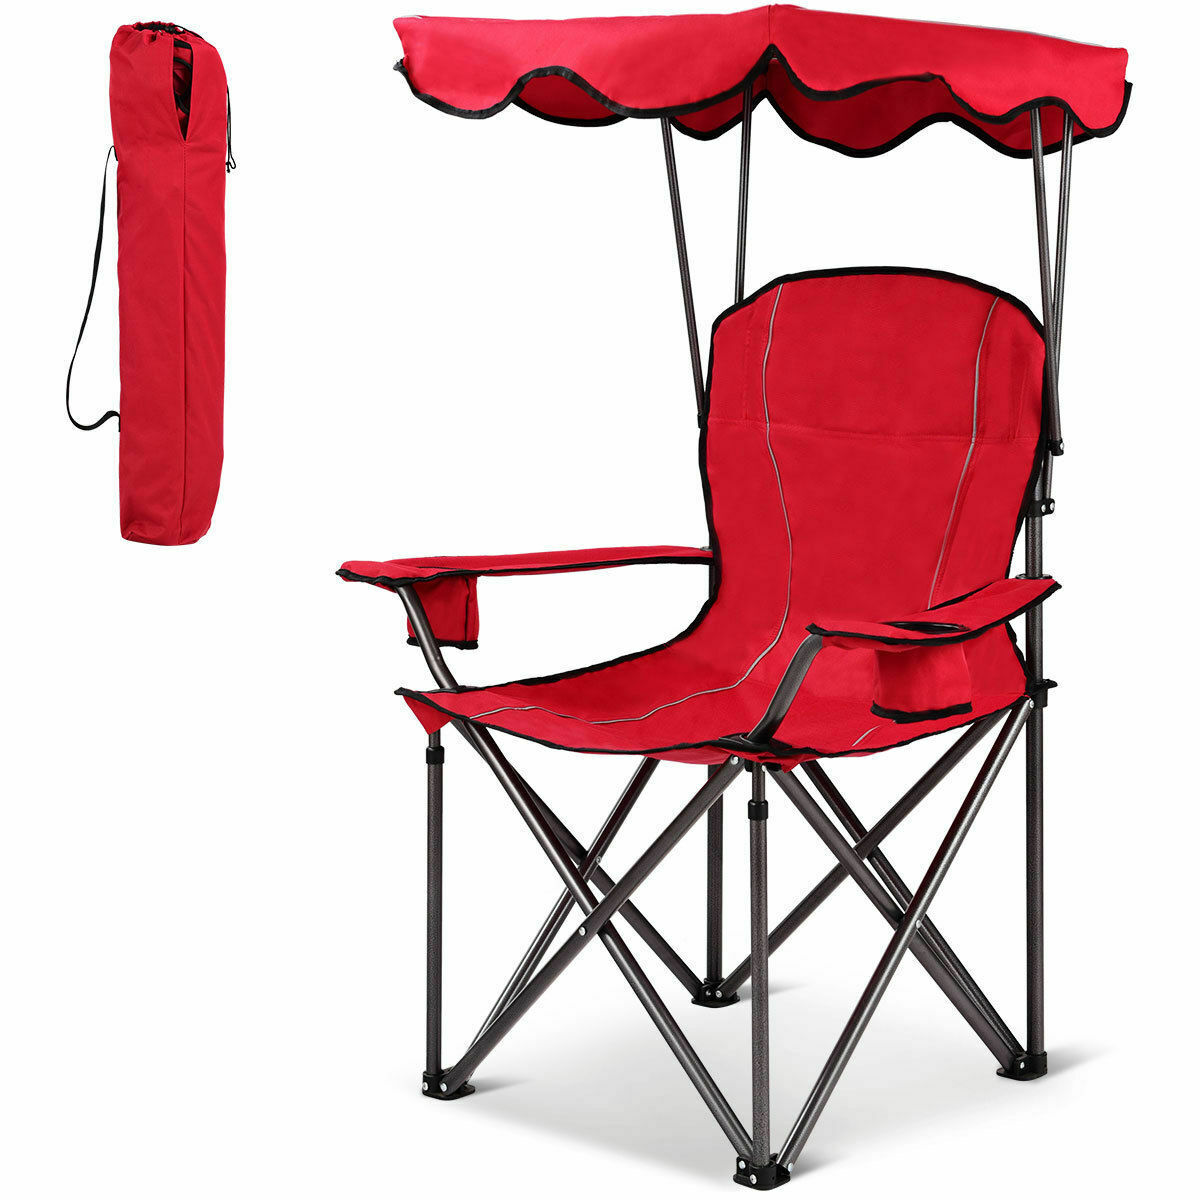 ChaiseX Portable Folding Beach Chair with Canopy Cup Holders Carrying Bag For Camping Hiking Outdoor